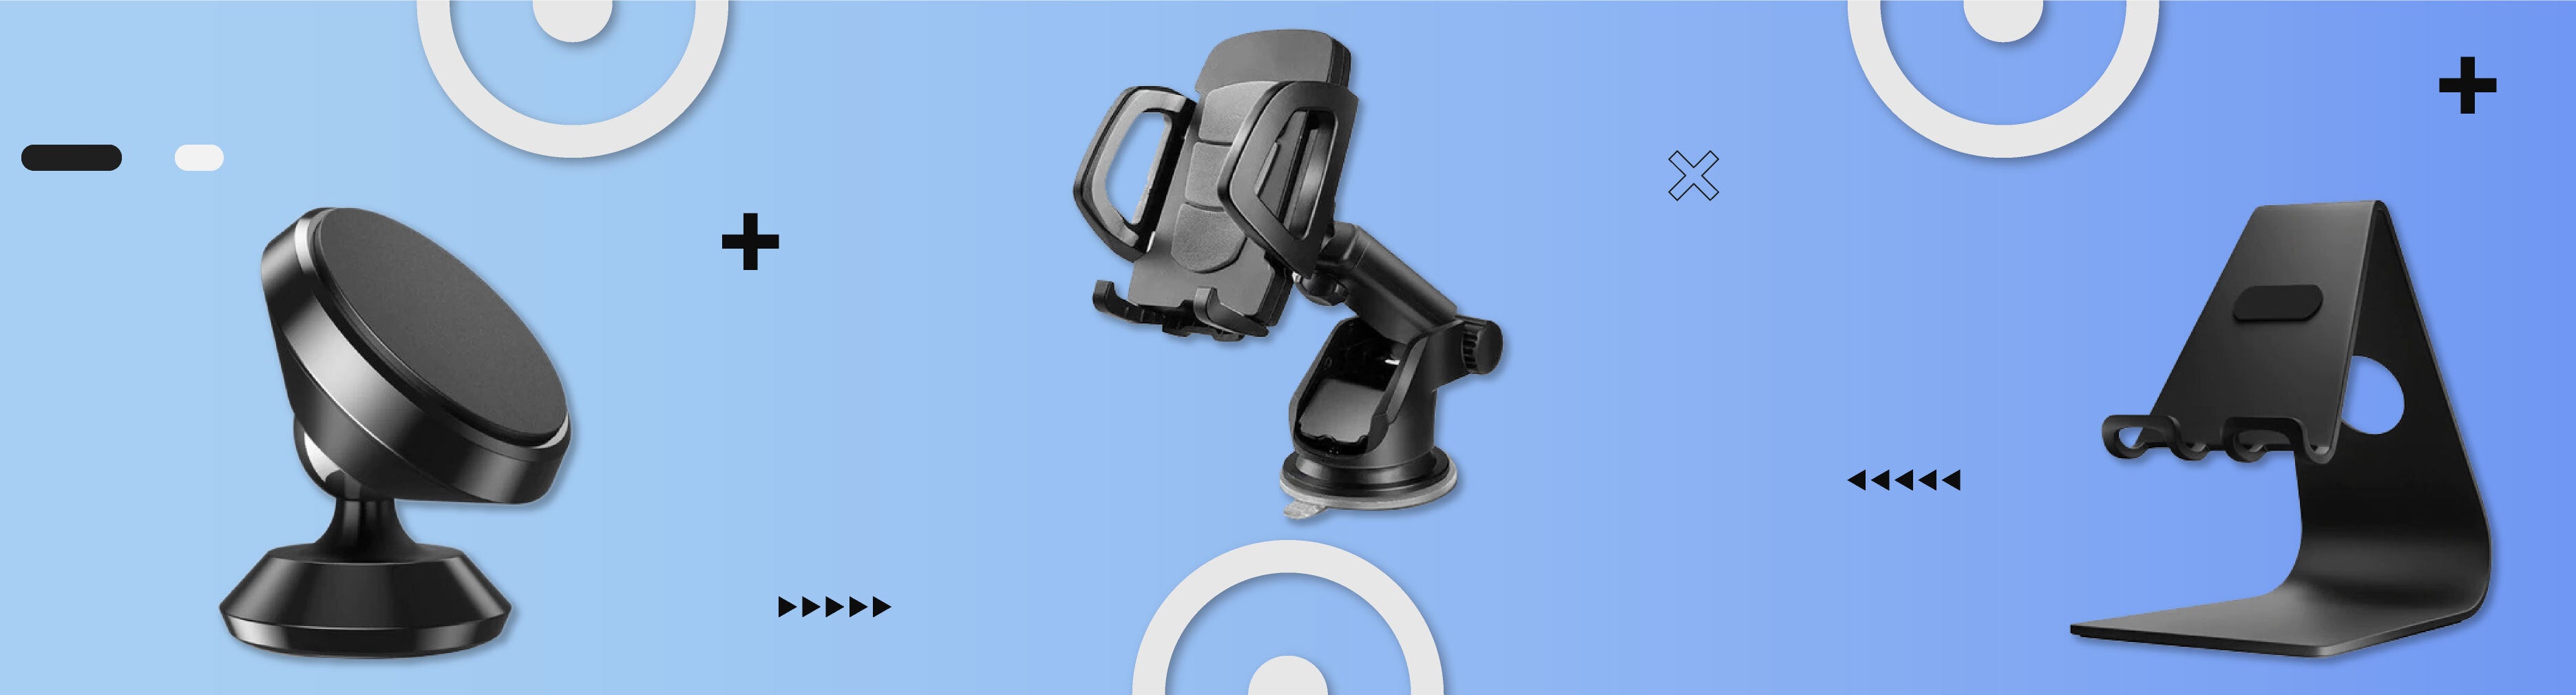 features of car phone holder